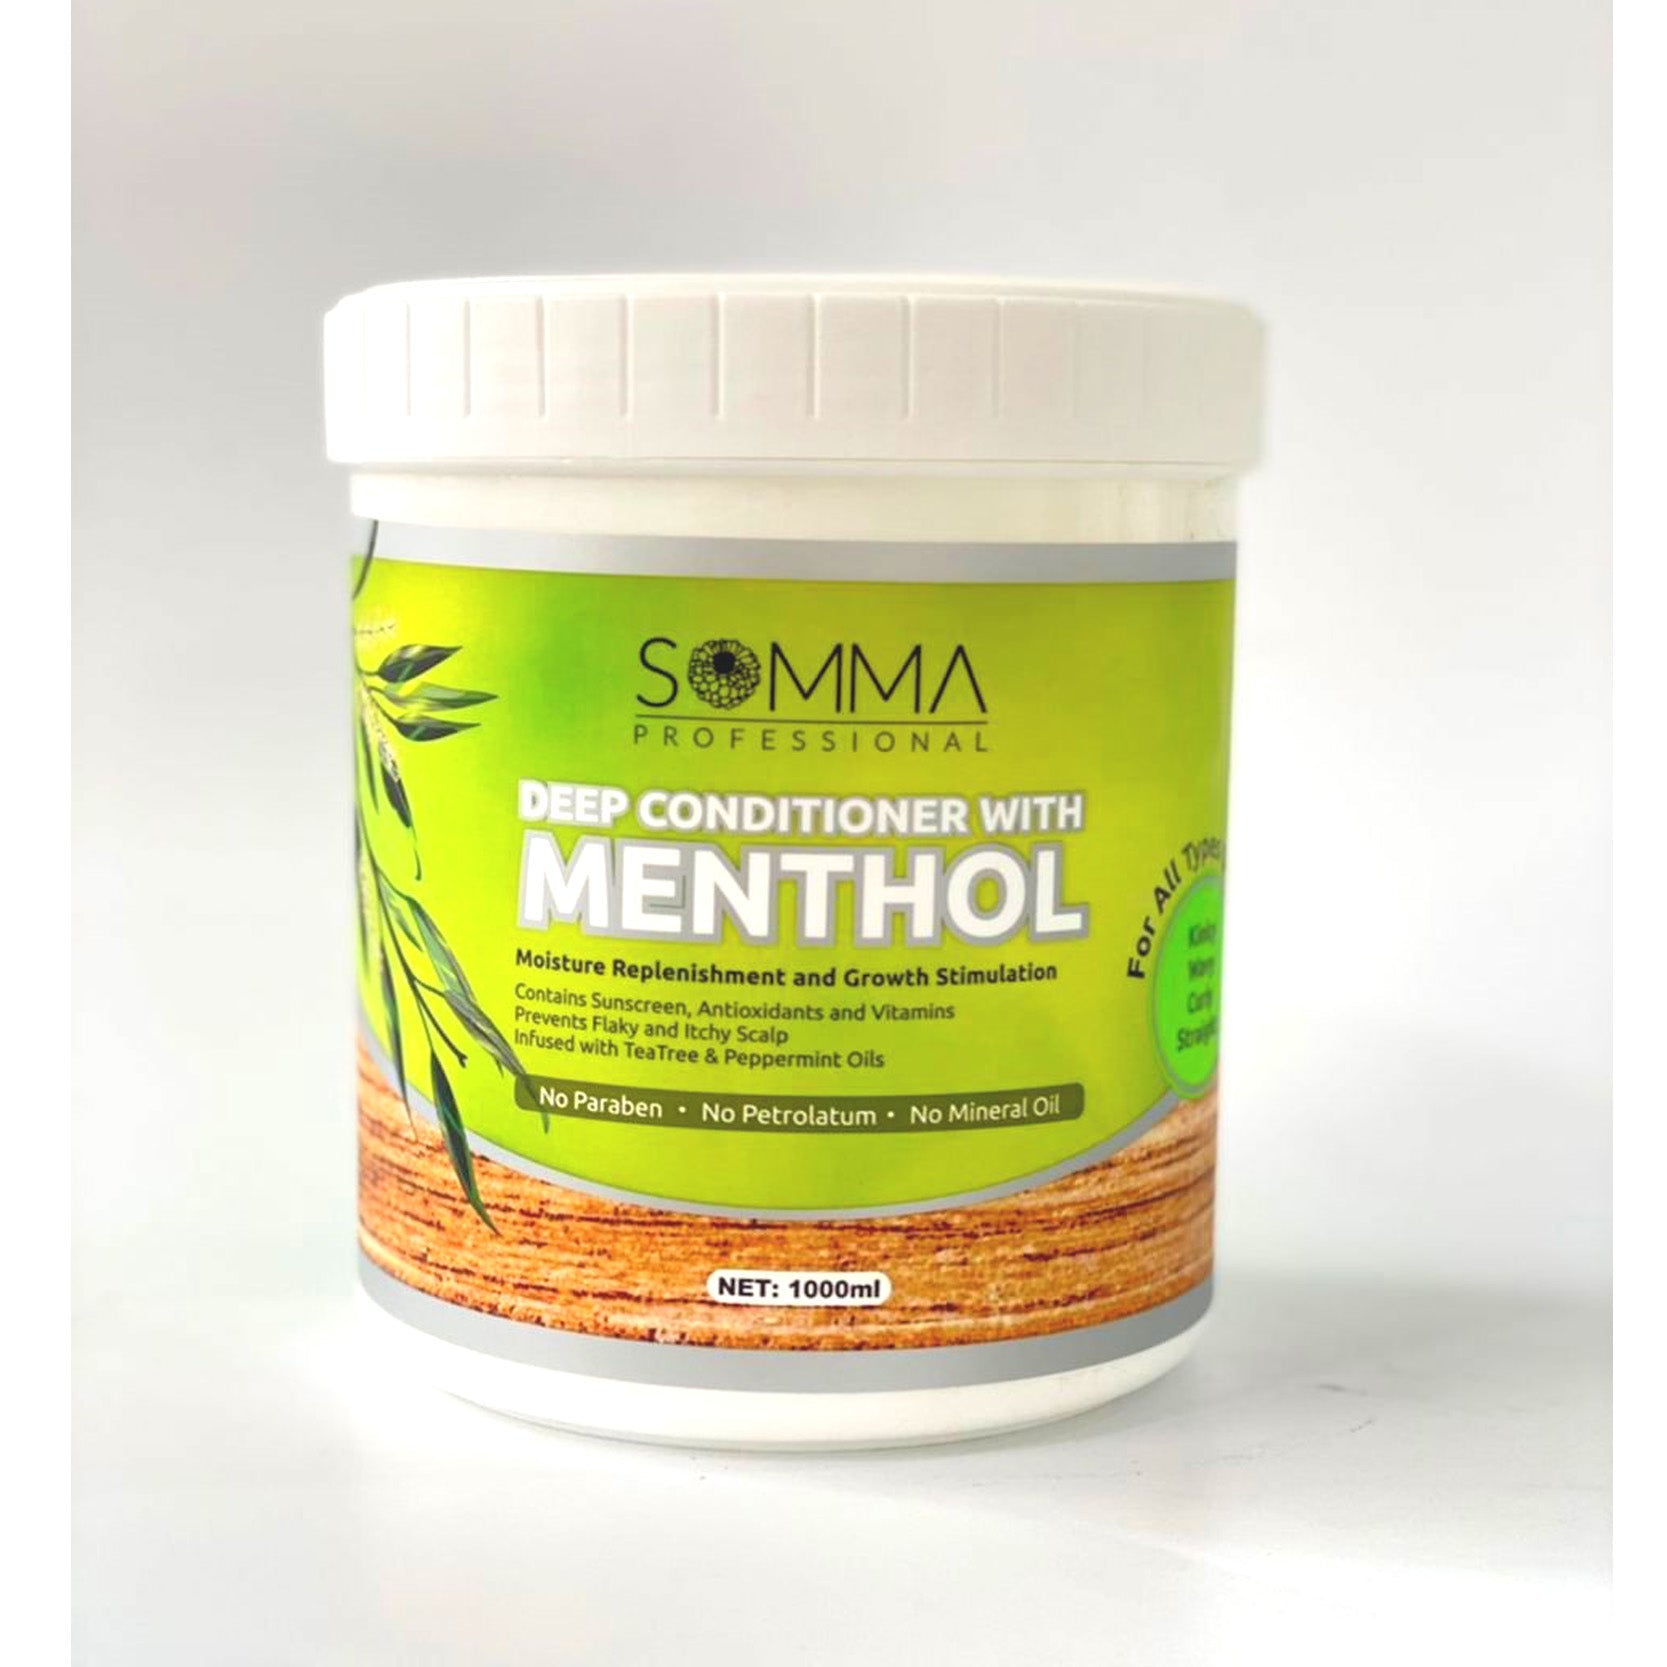 Somma Deep Conditioner with Menthol 1000ml